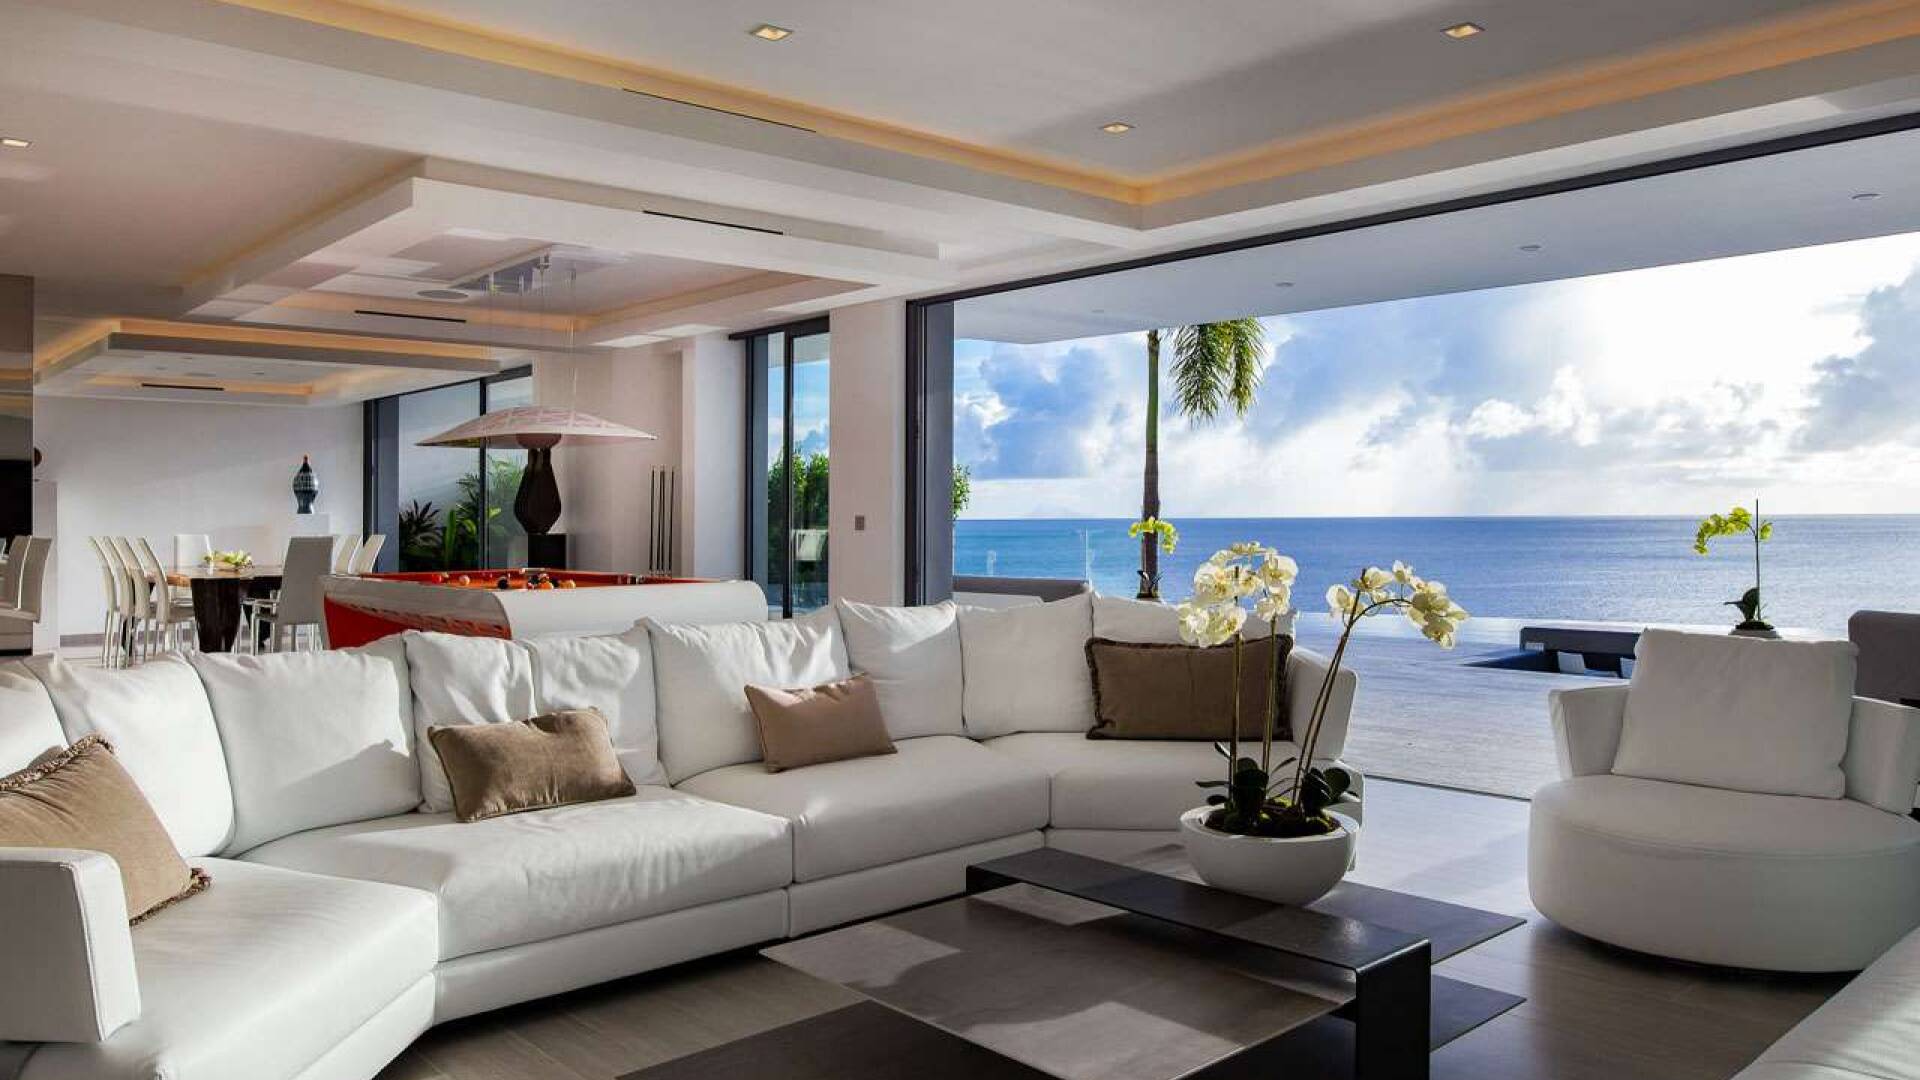 Living Room at WV AXL, Gustavia, St. Barthelemy